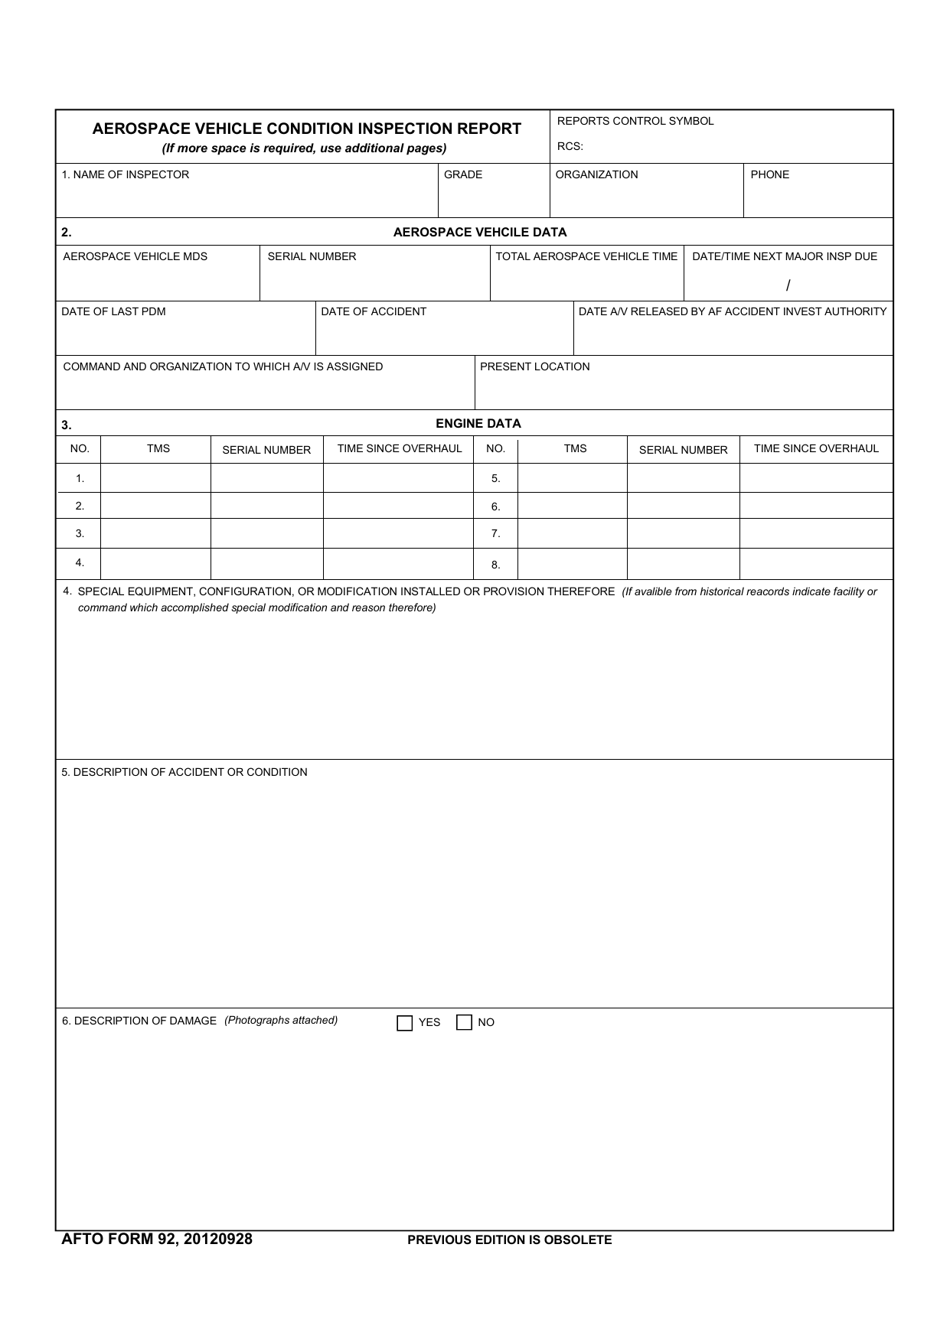 AFTO Form 92 Aerospace Vehicle Condition Inspection Report, Page 1